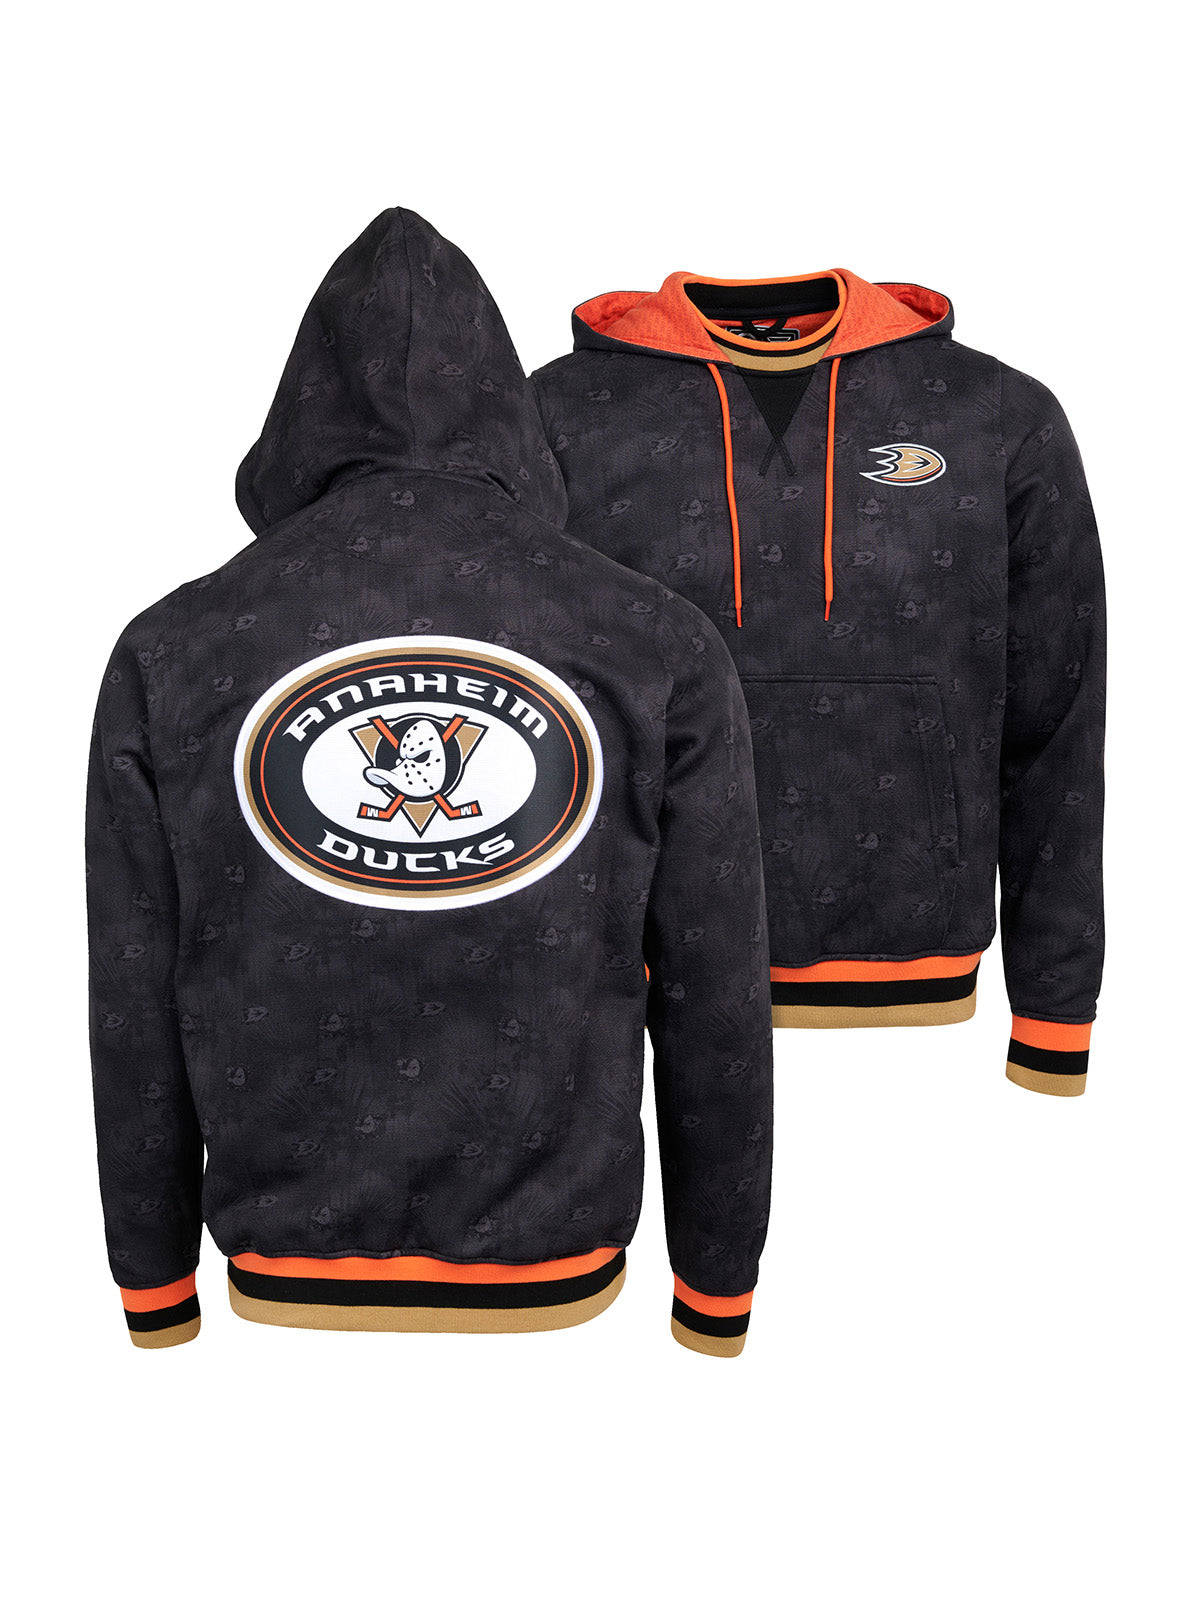 Anaheim Ducks Hoodie - Show your team spirit, with the iconic team logo patch on the front and back, and proudly display your Anaheim Ducks support in their team colors with this NHL hockey hoodie.